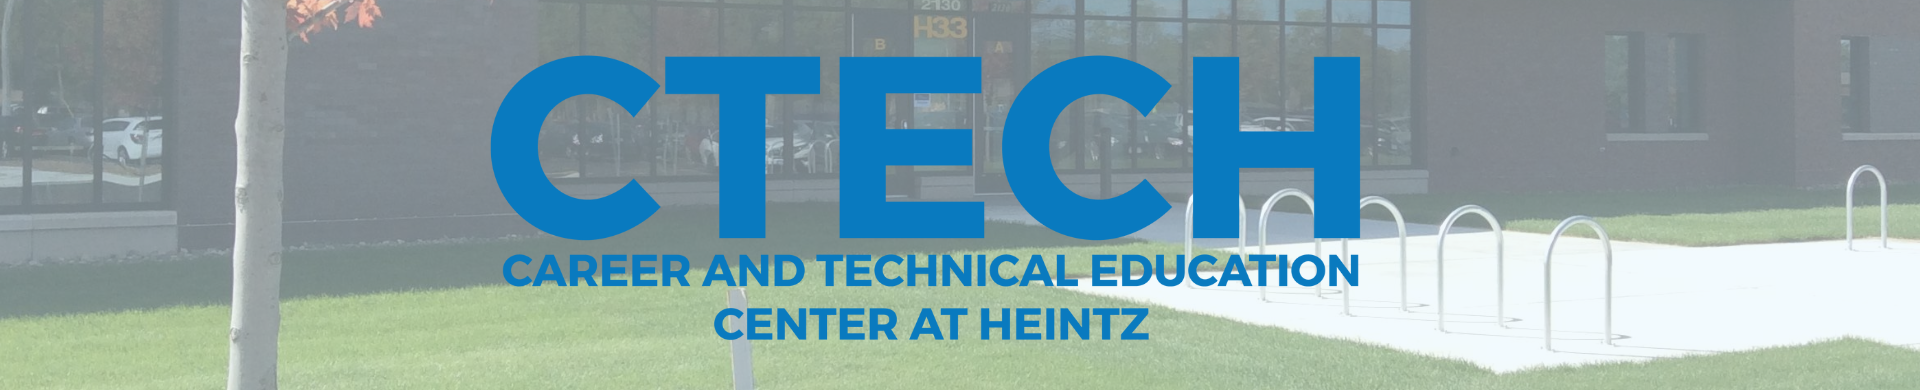 exterior of the CTECH building with the CTECH logo overlay